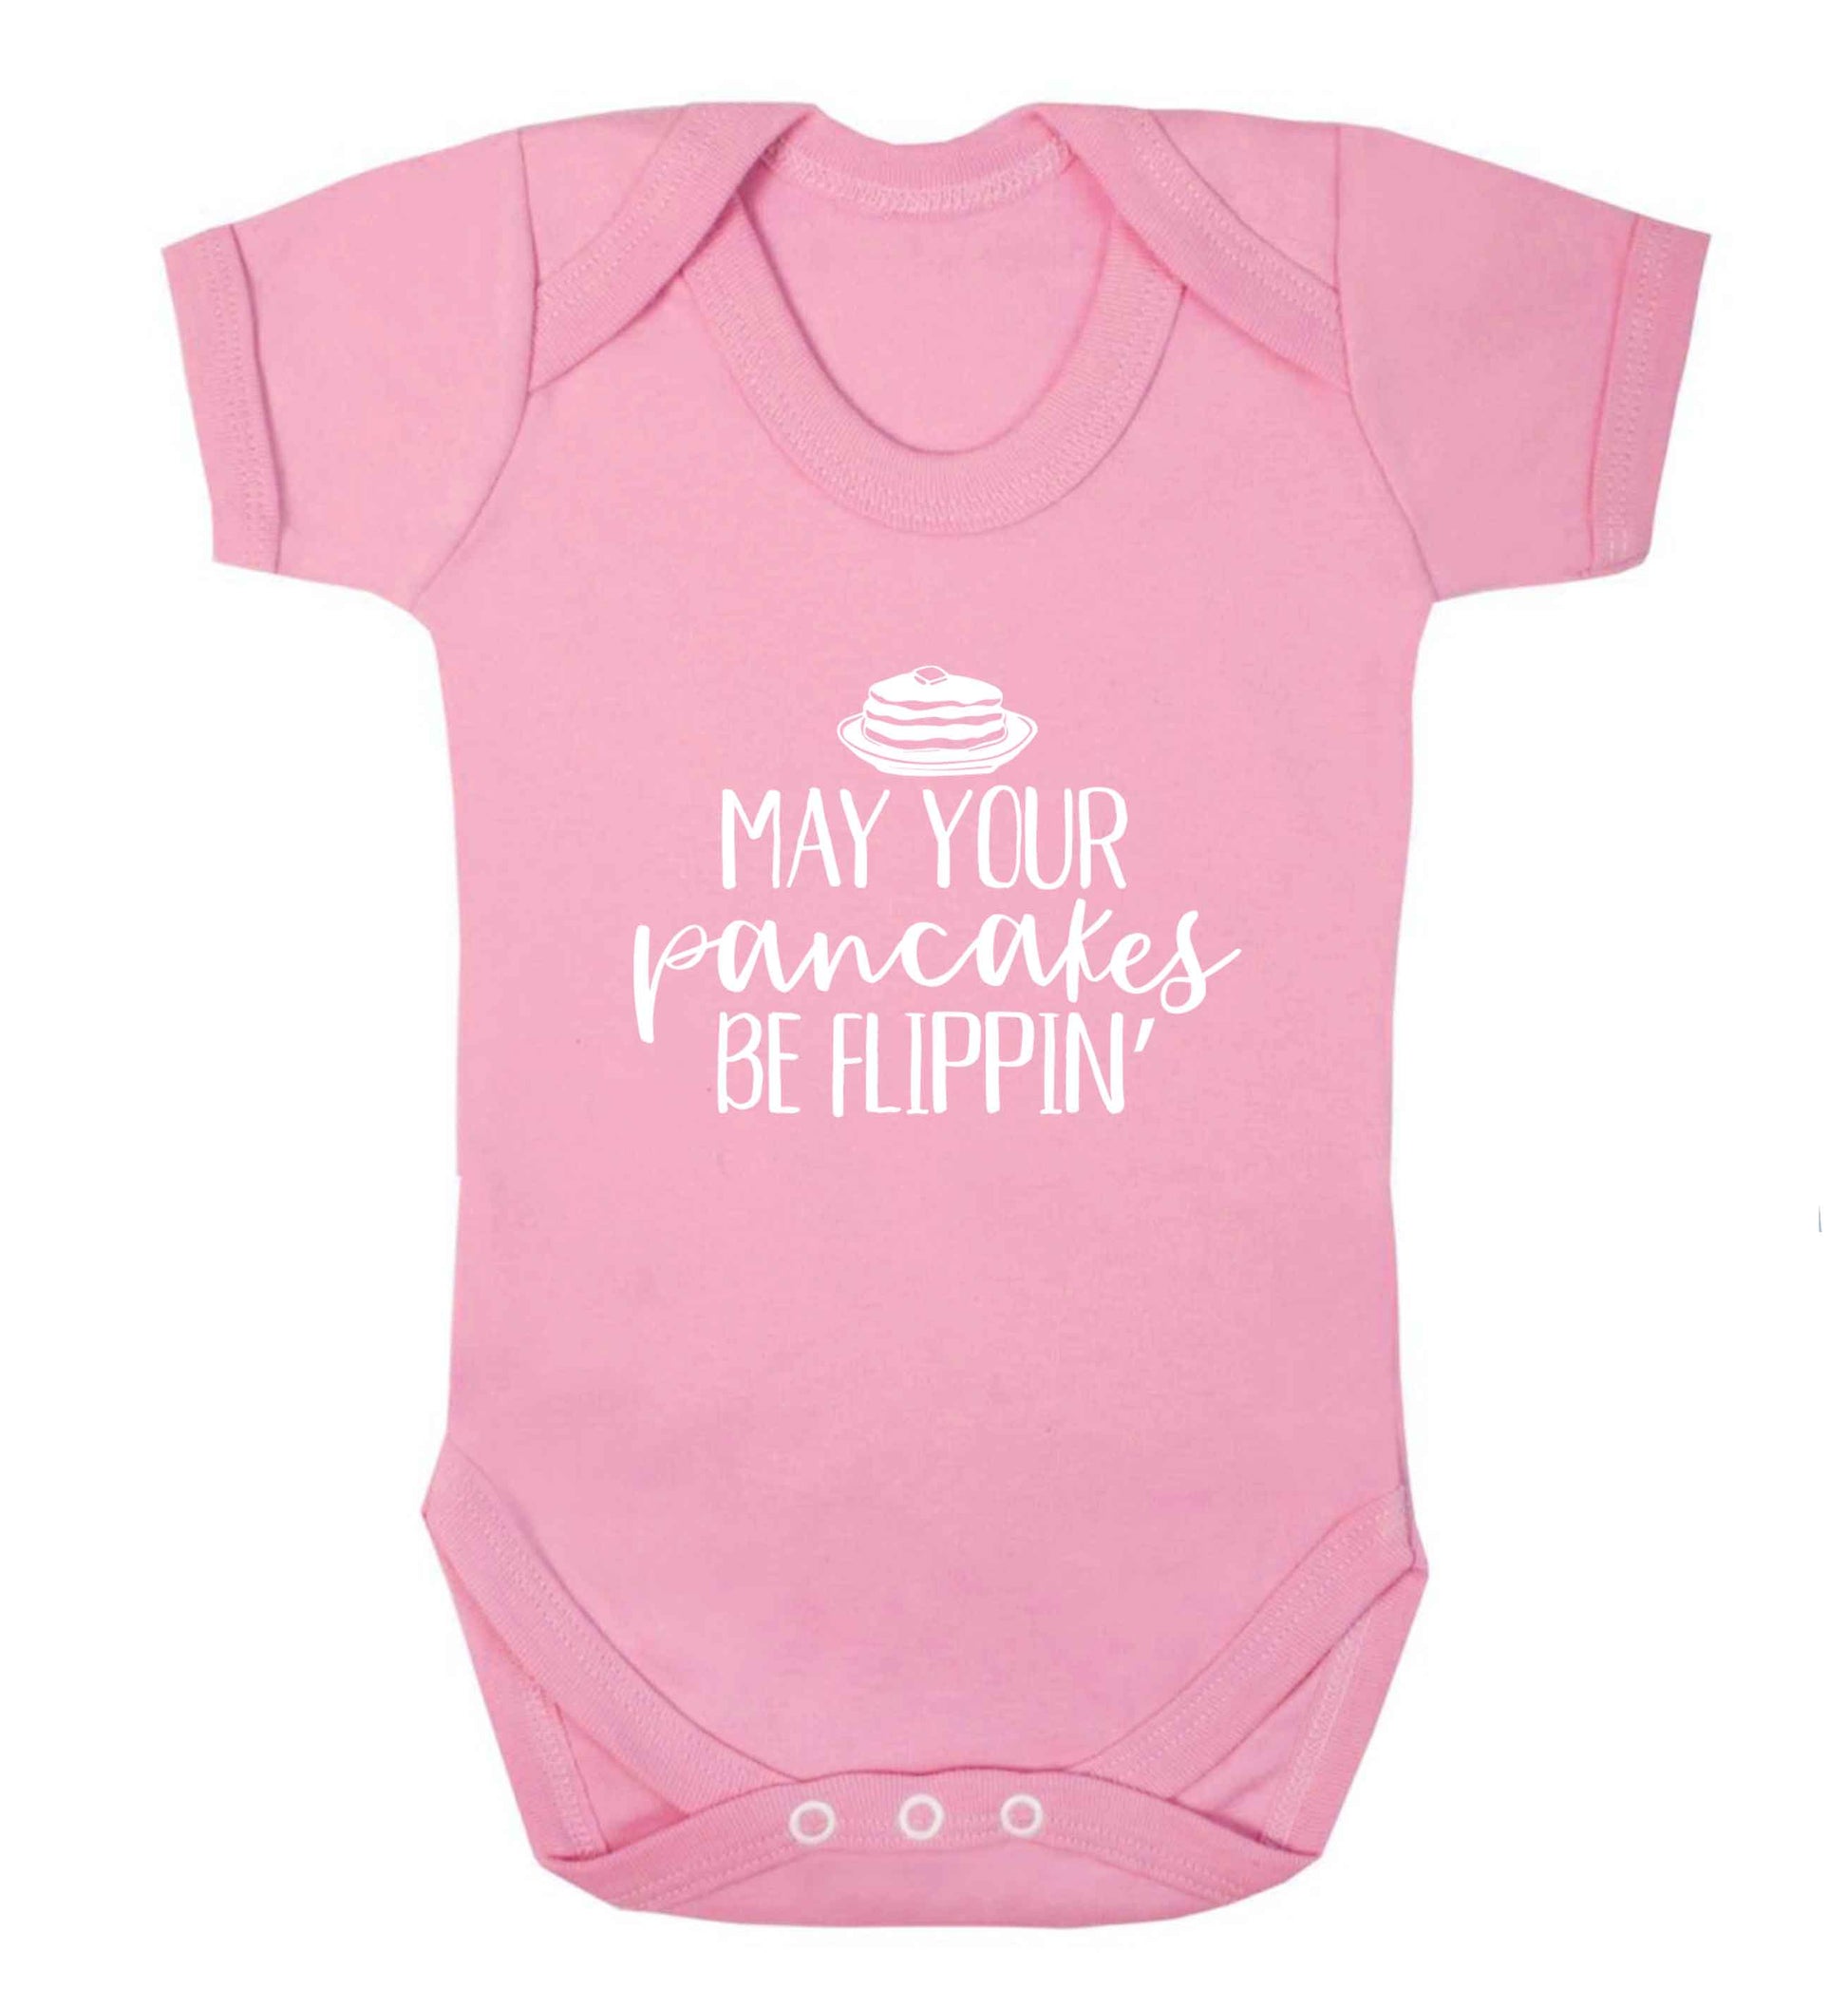 May your pancakes be flippin' baby vest pale pink 18-24 months